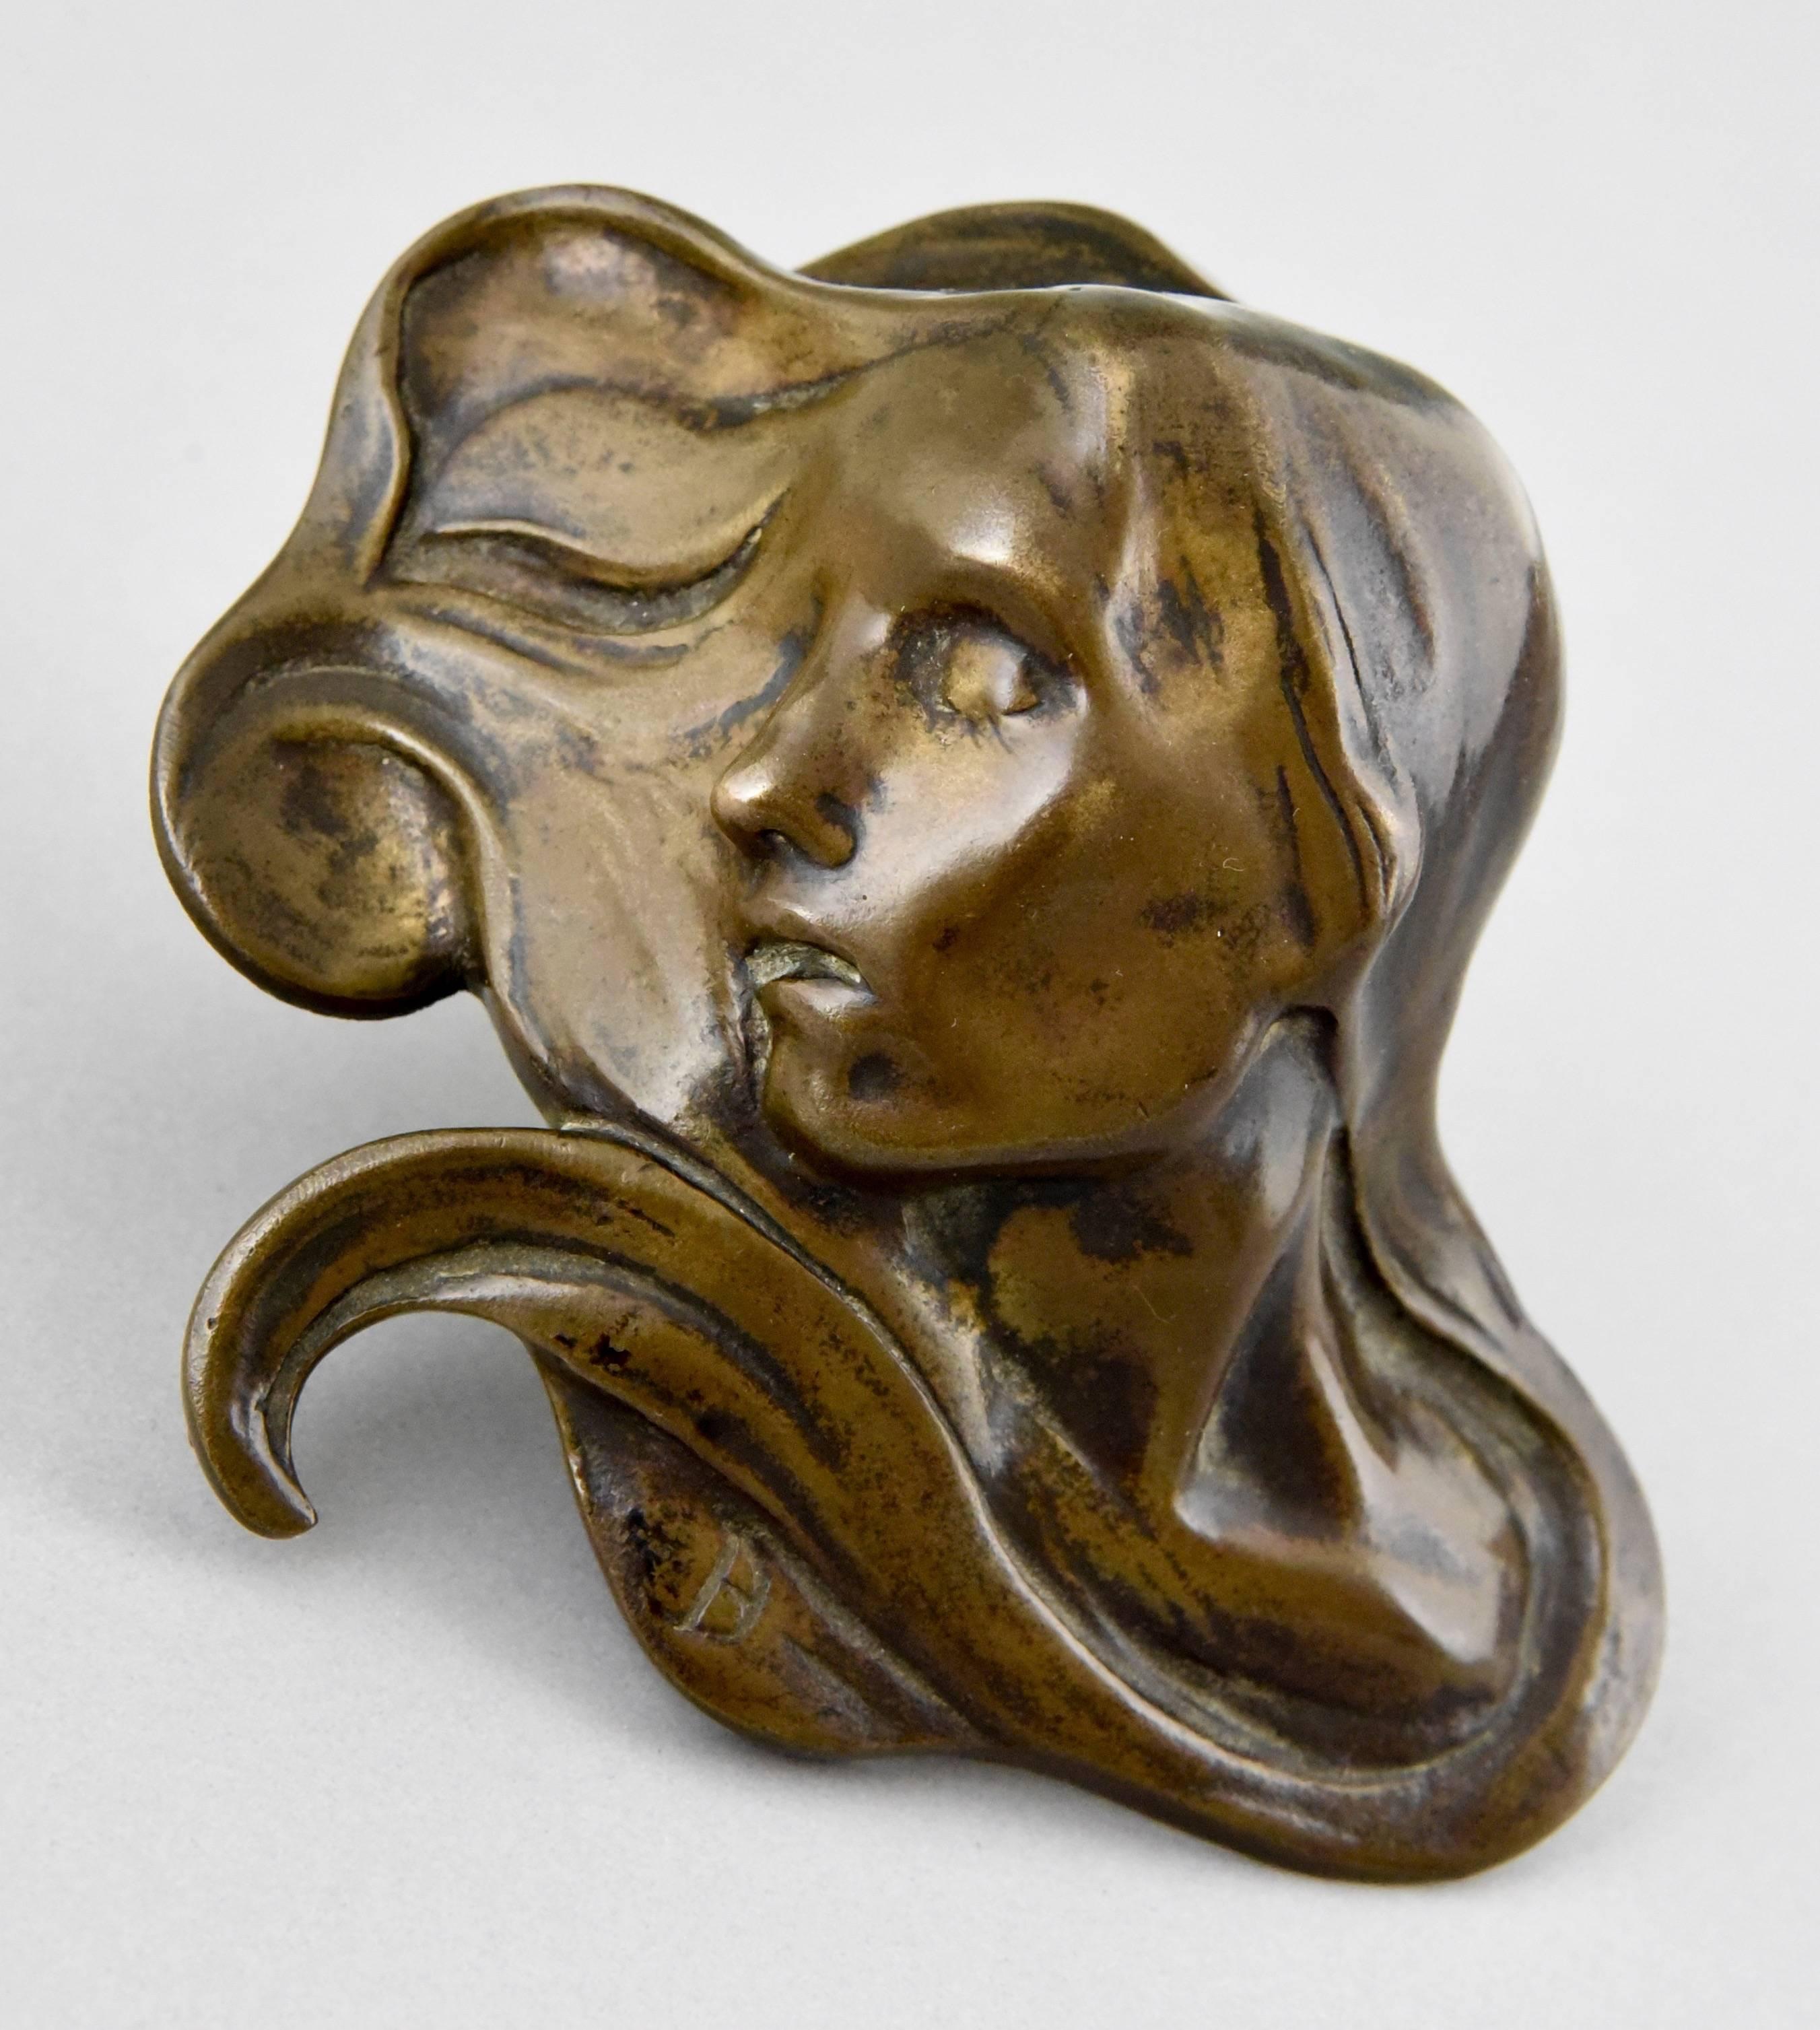 A paperweight in the shape of a females face with swirling hair.
By Paul Dubois.
Artist/ Maker: Paul Dubois.
Signature/ Marks: Monogram PD.
Style: Art Nouveau.
Date: 1900.
Material: Bronze.
Origin: Belgium.
Size: H 4.5 cm x L 11.5 cm. x W